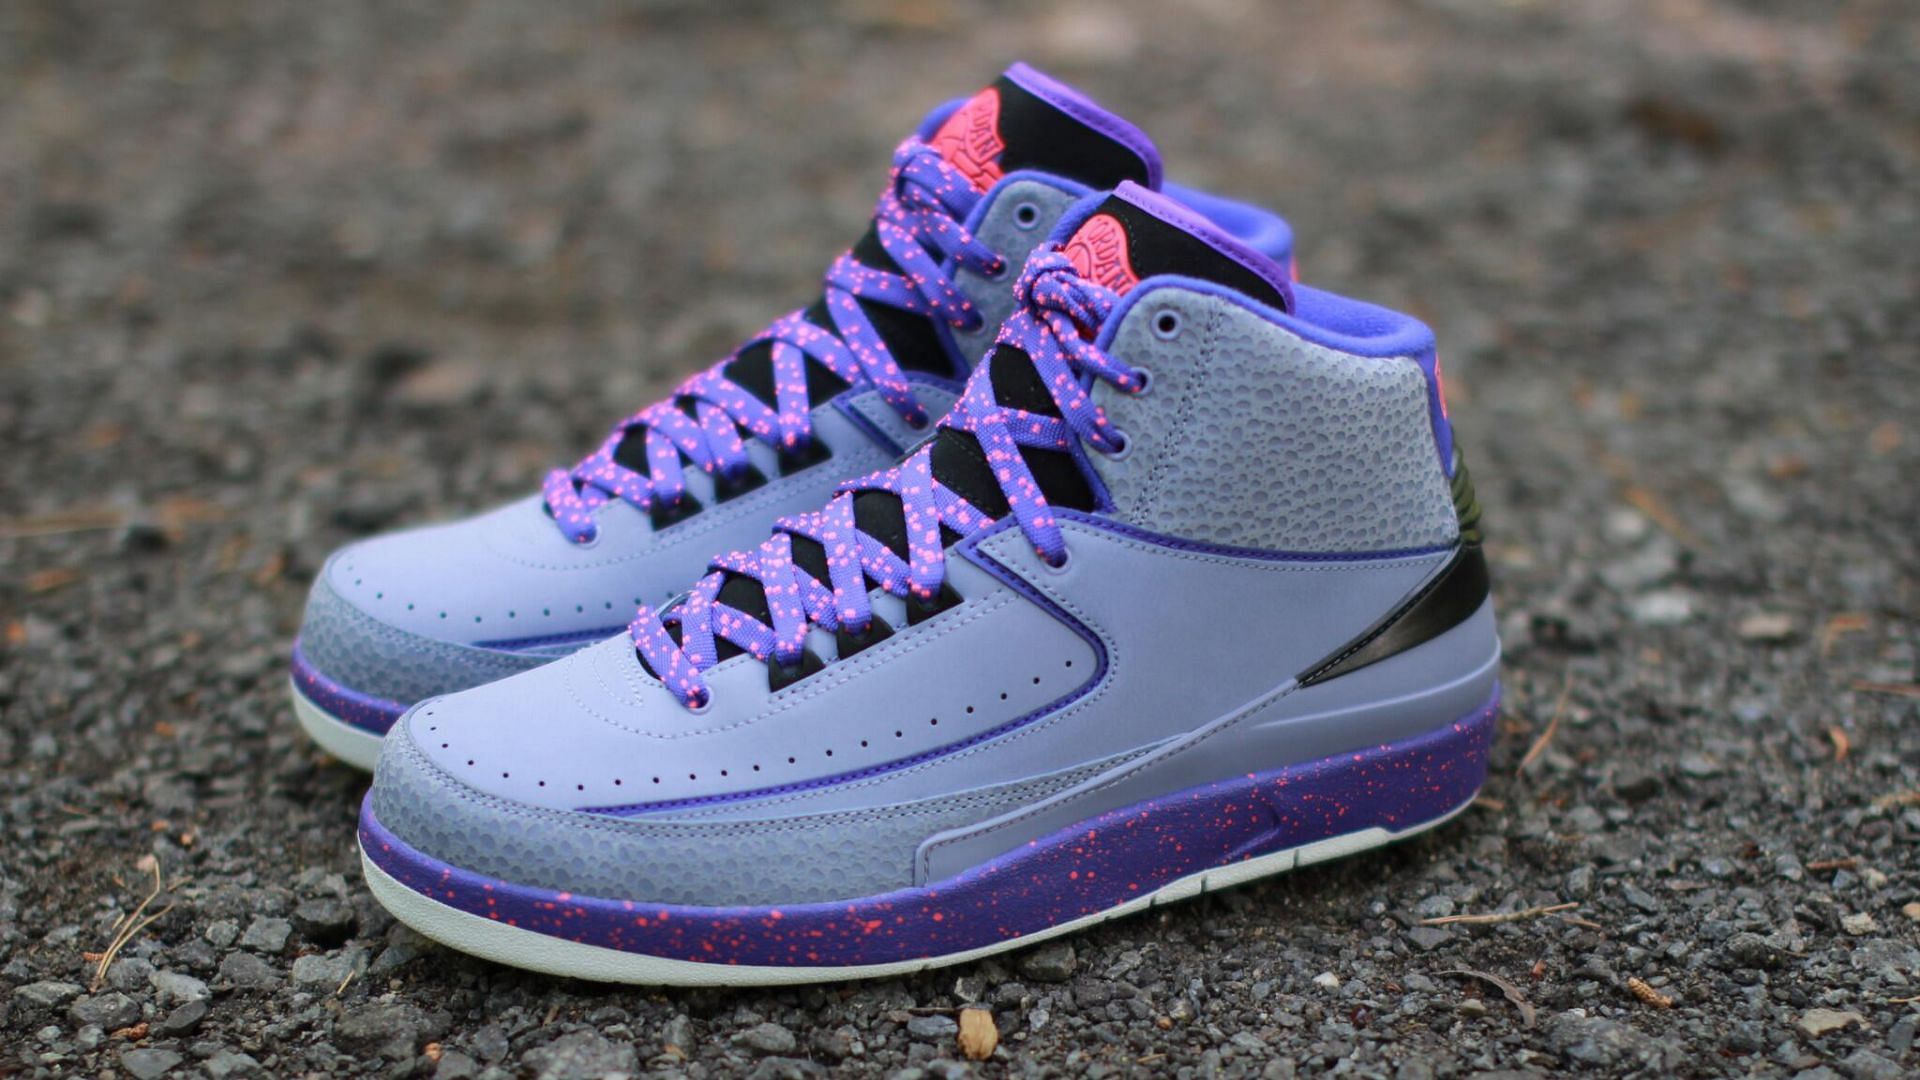 Take a look at the Iron Purple colorway (Image via Twitter/@sneakershouts)